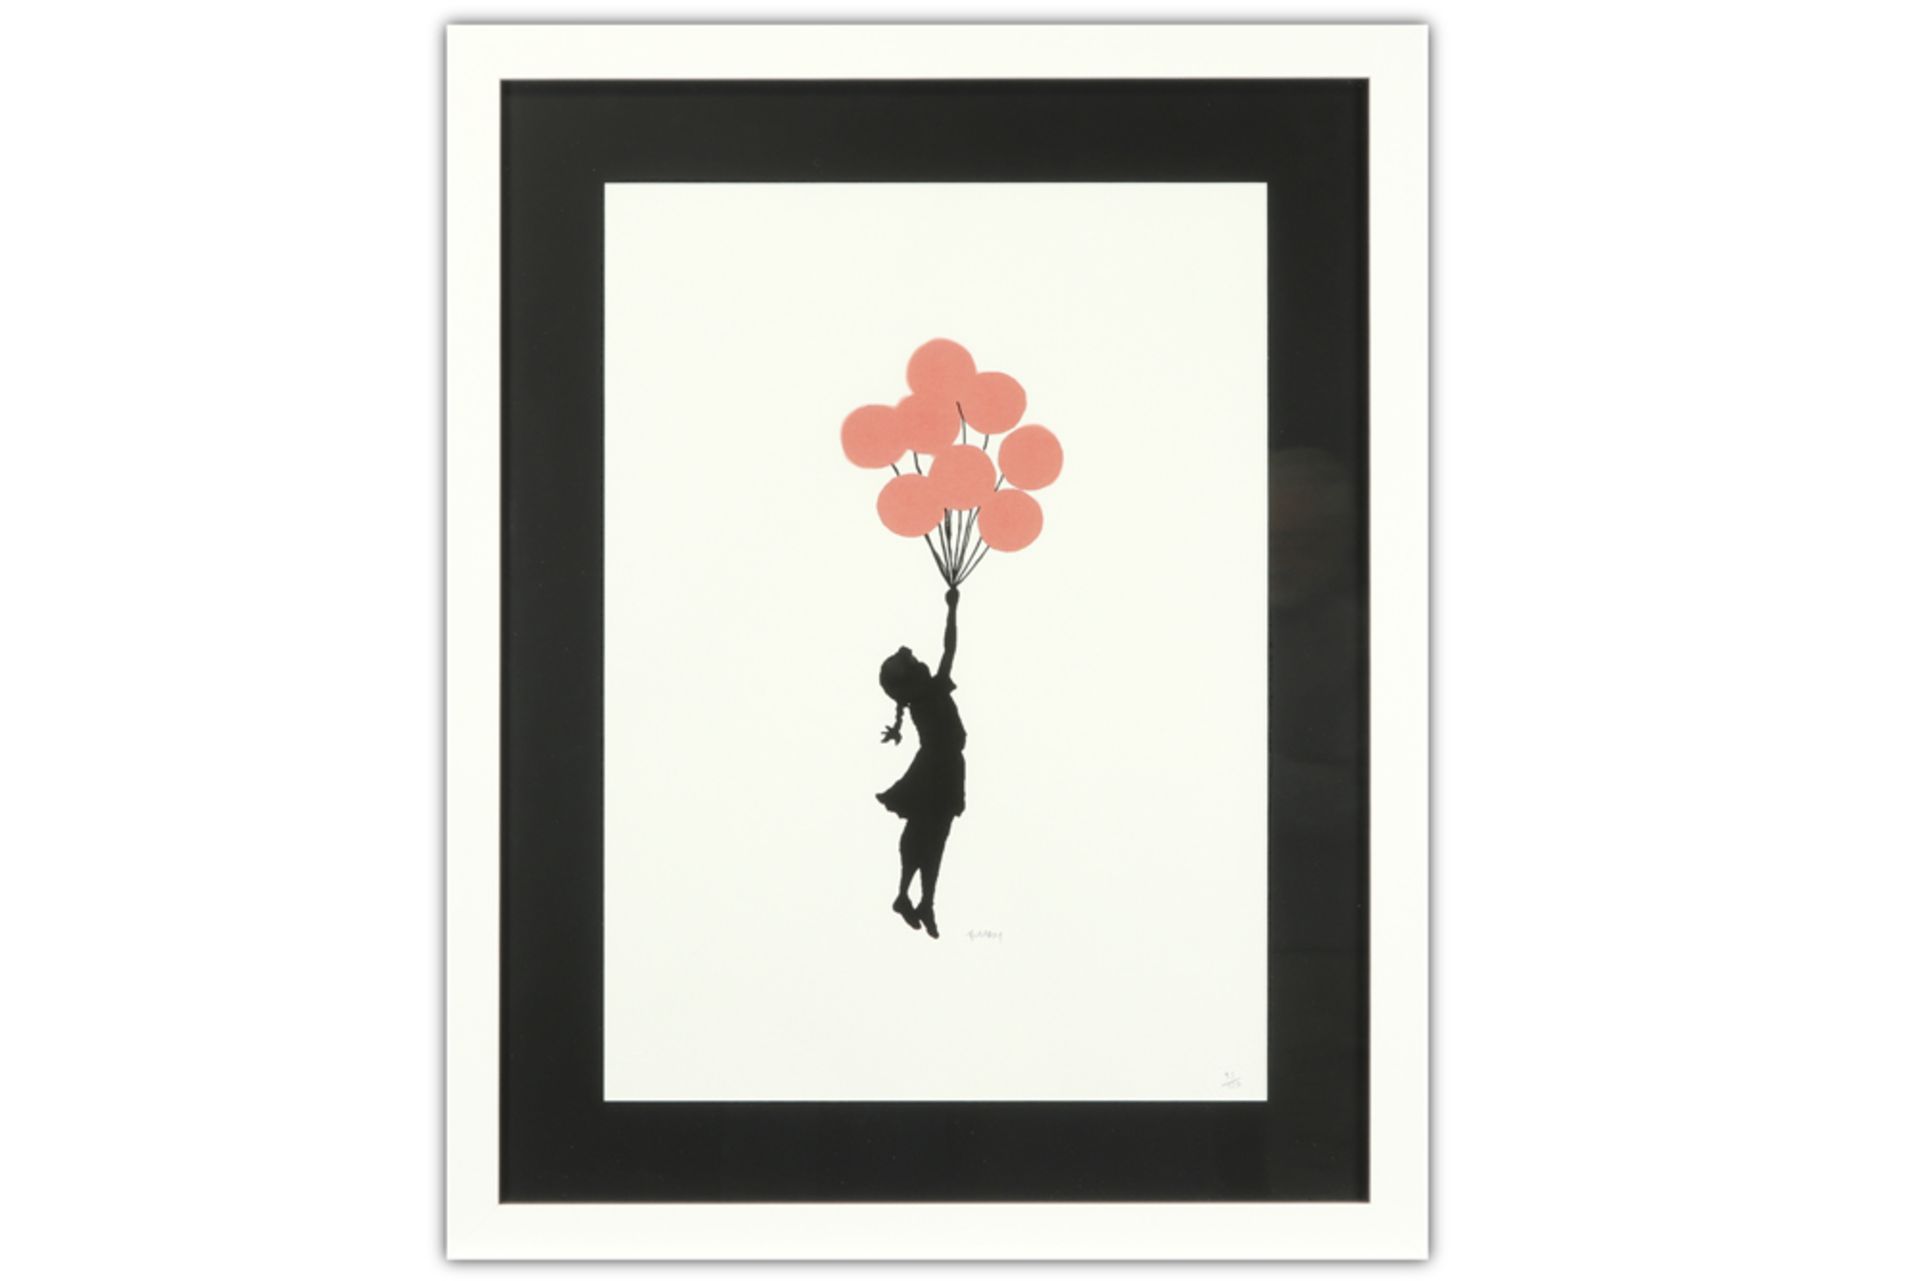 print after Banksy's "Girl with balloons" - with drystamp "P.O.W. Printmaking" || BANKSY (° - Image 3 of 3